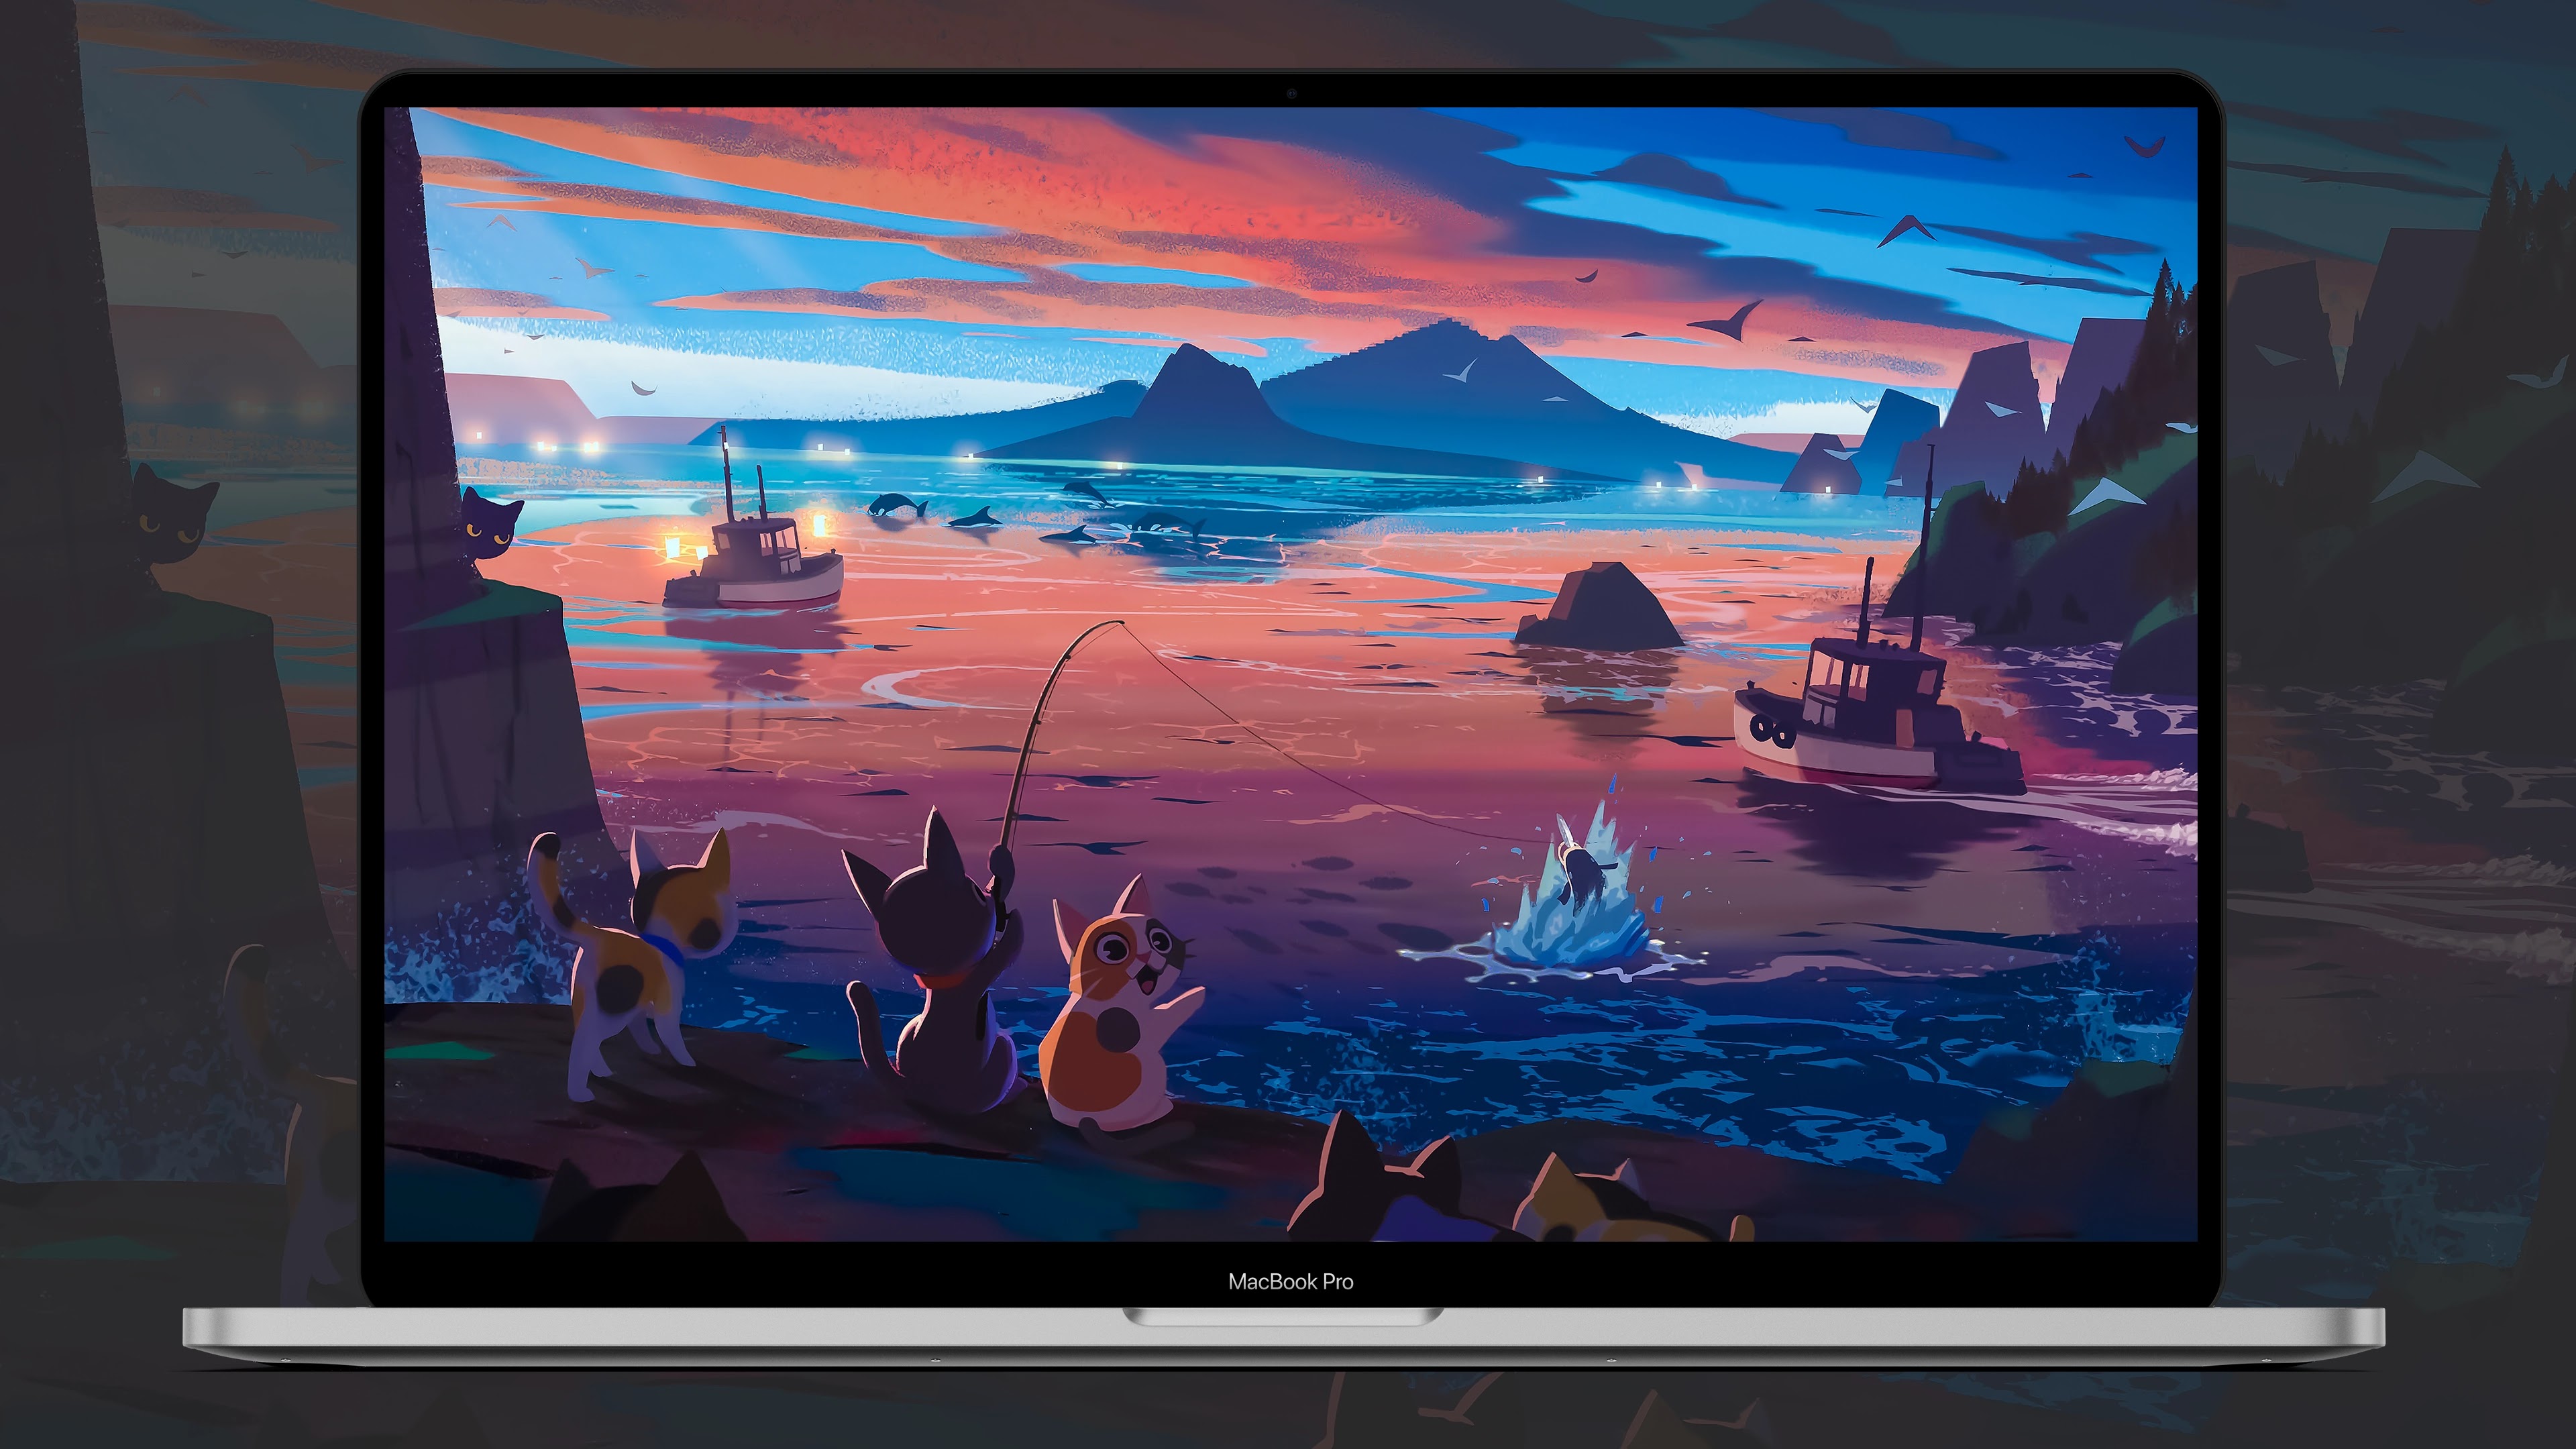 A MacBook laptop 4k wallpaper of  three kittens fishing in the sea and a beautiful sunset with dolphins jumping in the background